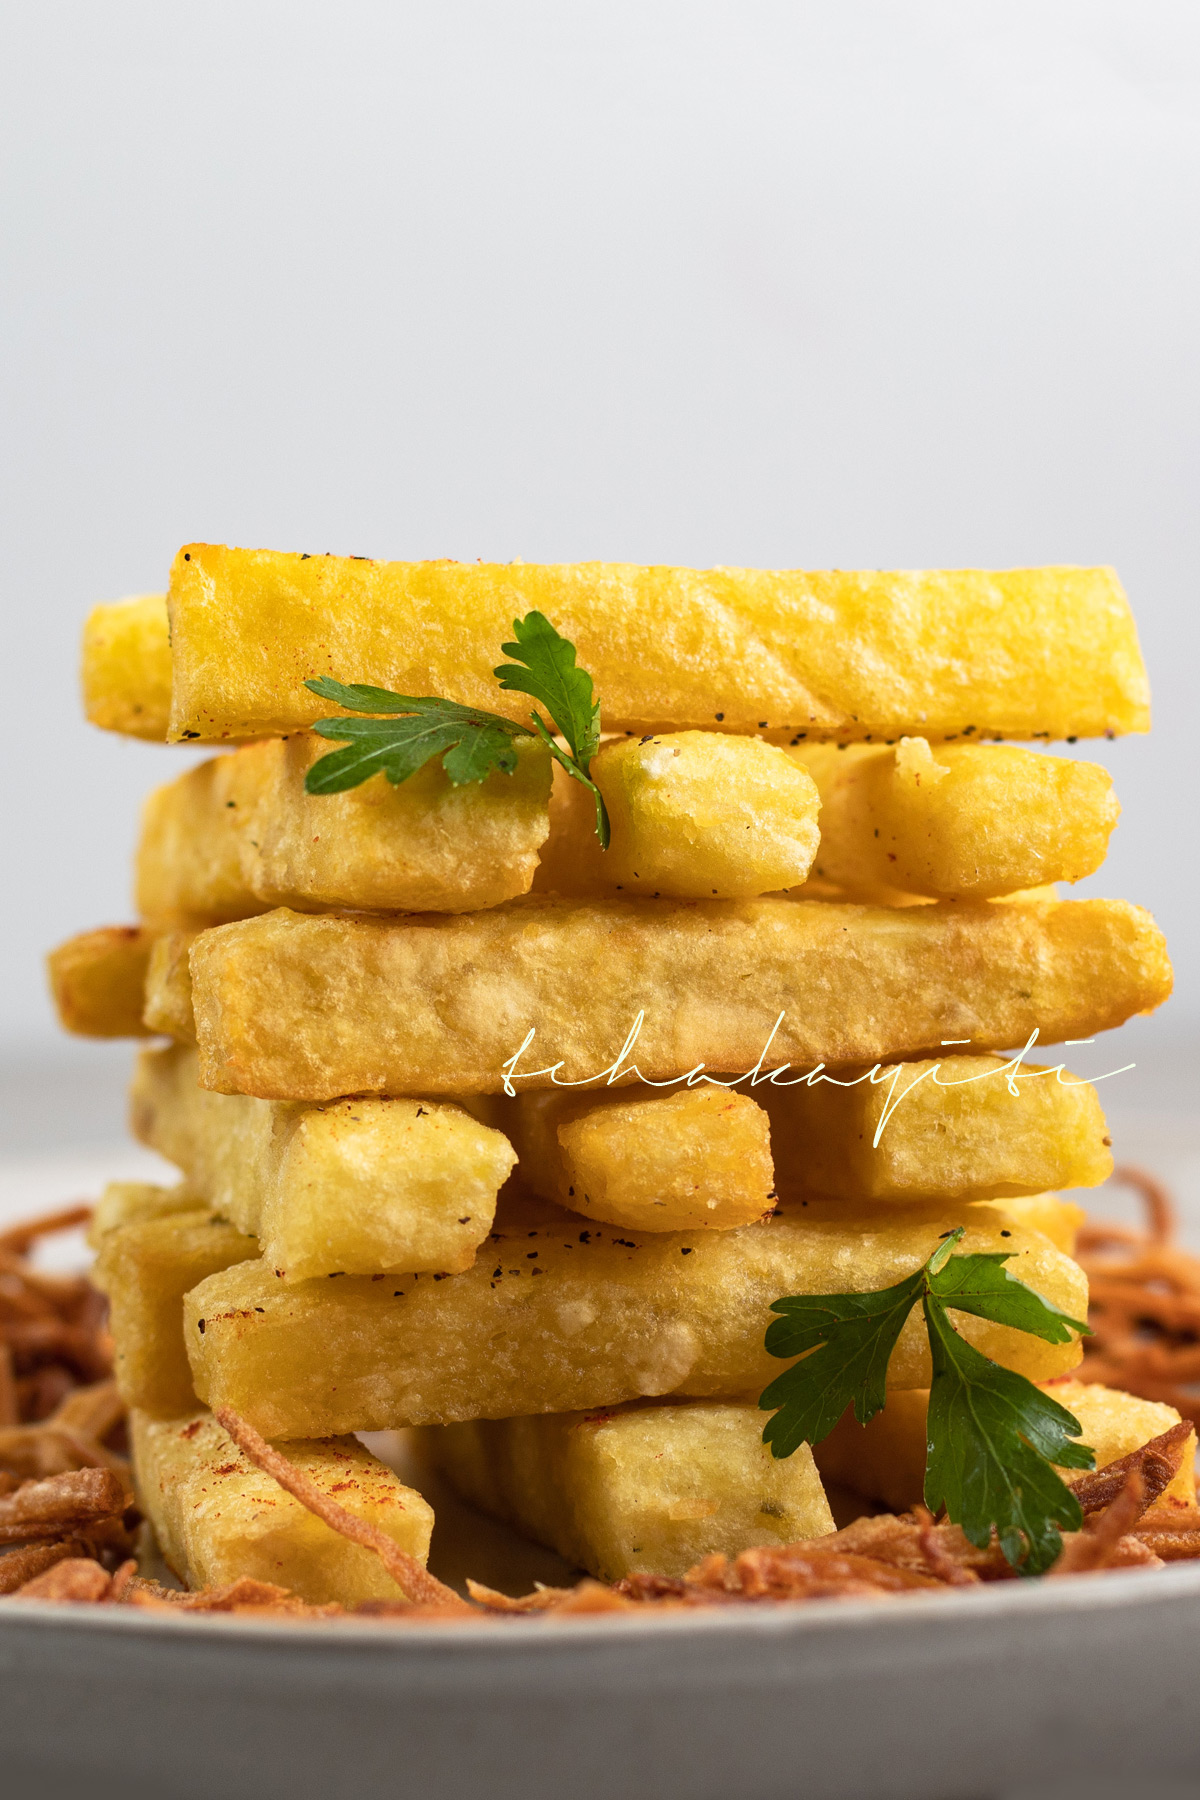 These mashed breadfruit fries pair well with burgers | tchakayiti.com